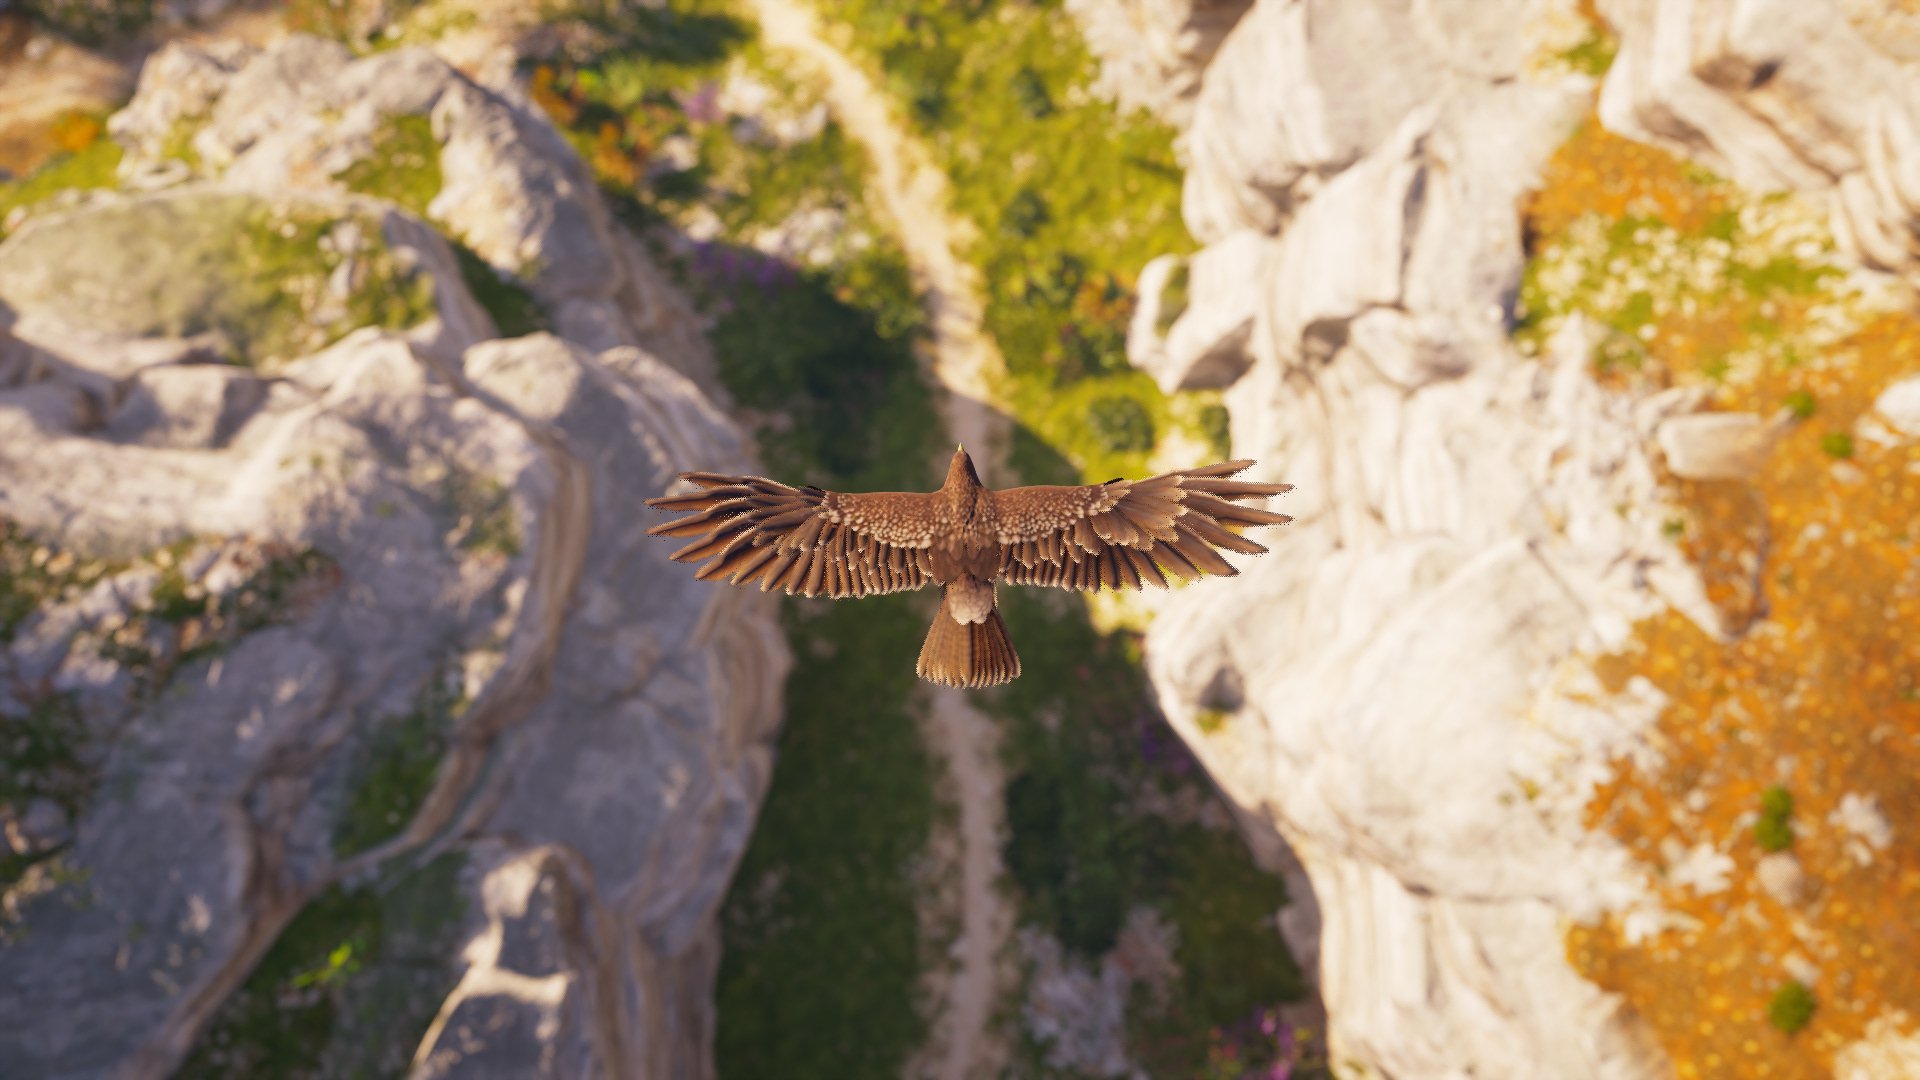 Video Game Assassin's Creed Odyssey HD Wallpaper | Background Image